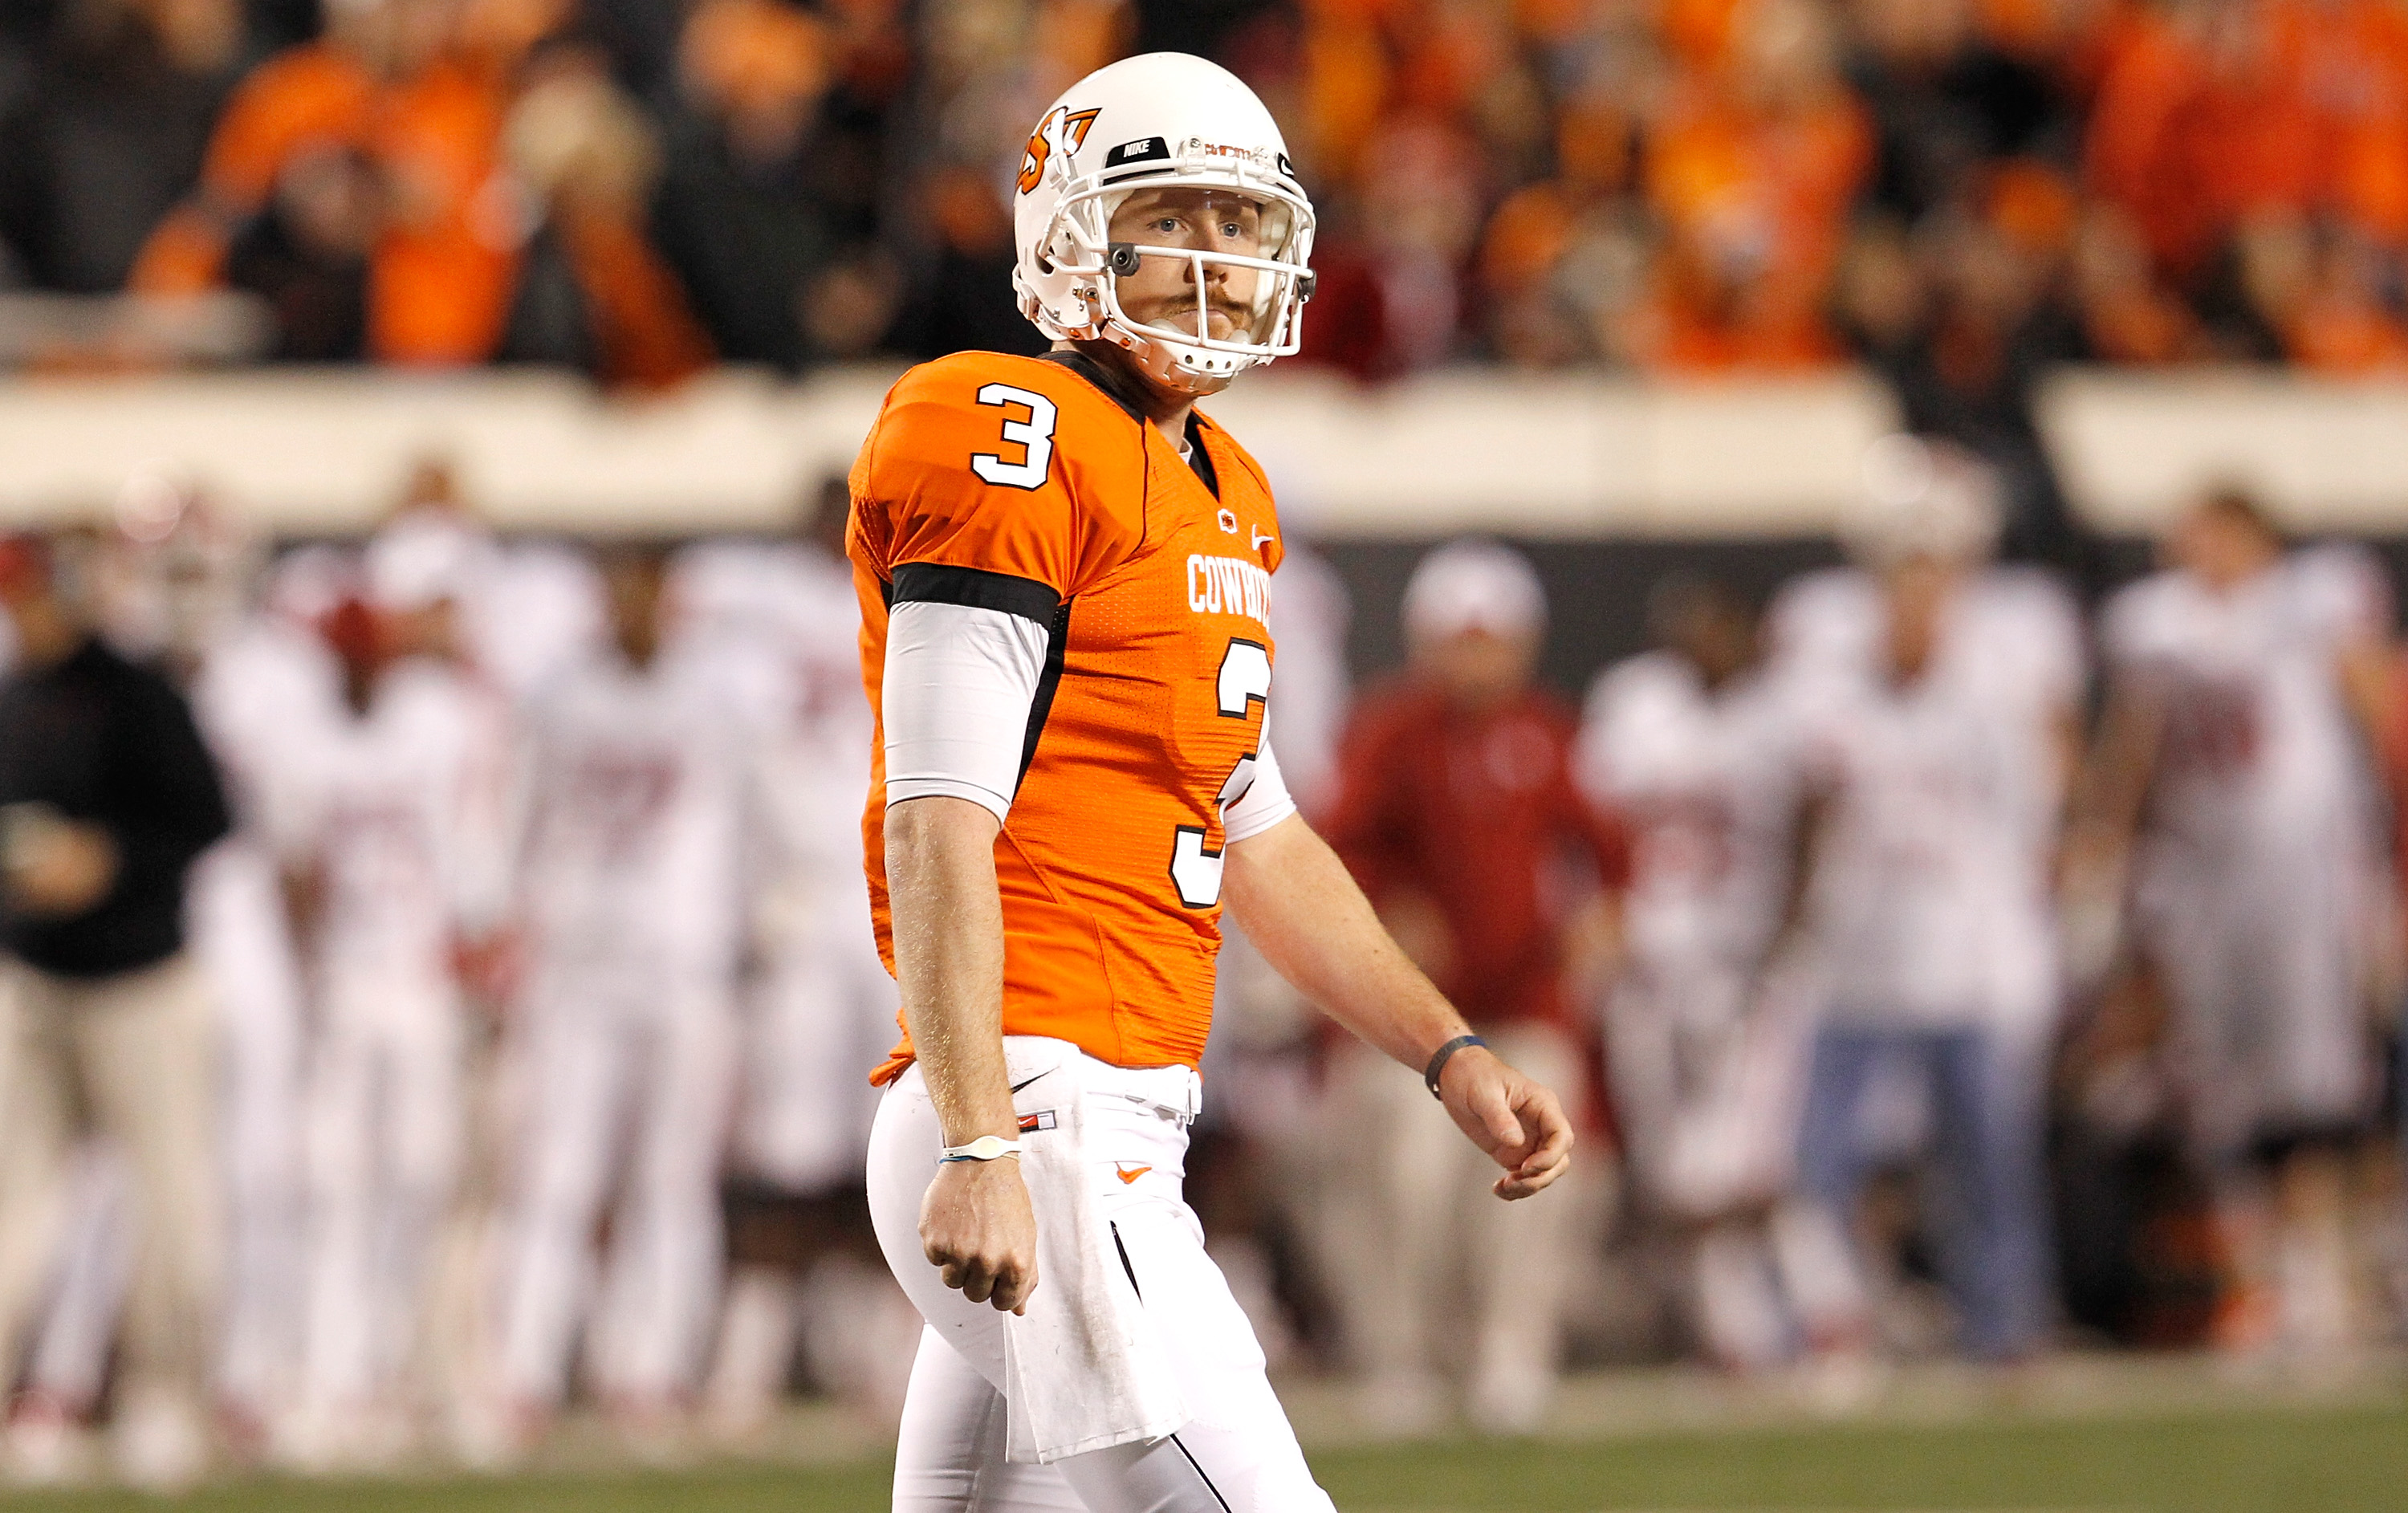 STILLWATER, OK - NOVEMBER 27:  Quarterback Brandon Weeden #3 of the Oklahoma State Cowboys walks off the field after failing to make a first down against the Oklahoma Sooners at Boone Pickens Stadium on November 27, 2010 in Stillwater, Oklahoma.  (Photo b